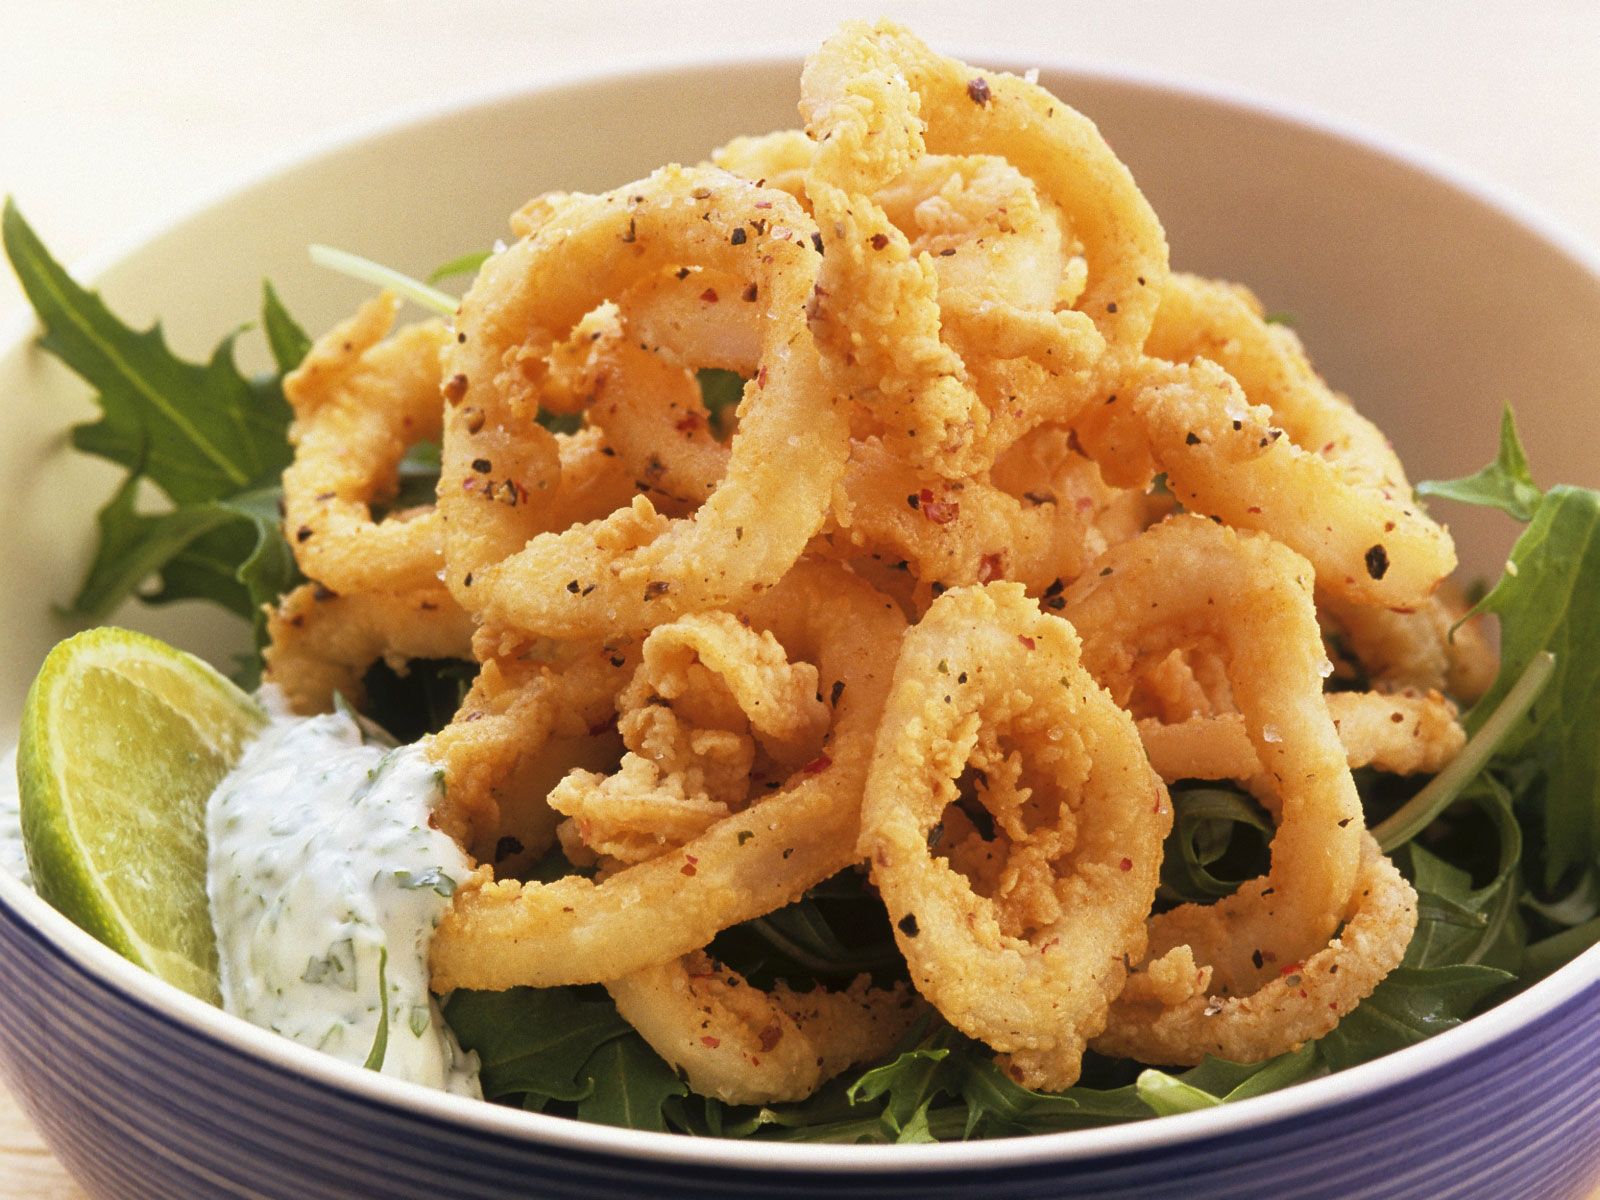 Dip These Foods in Sauces and We’ll Guess Your Eye Color Calamari